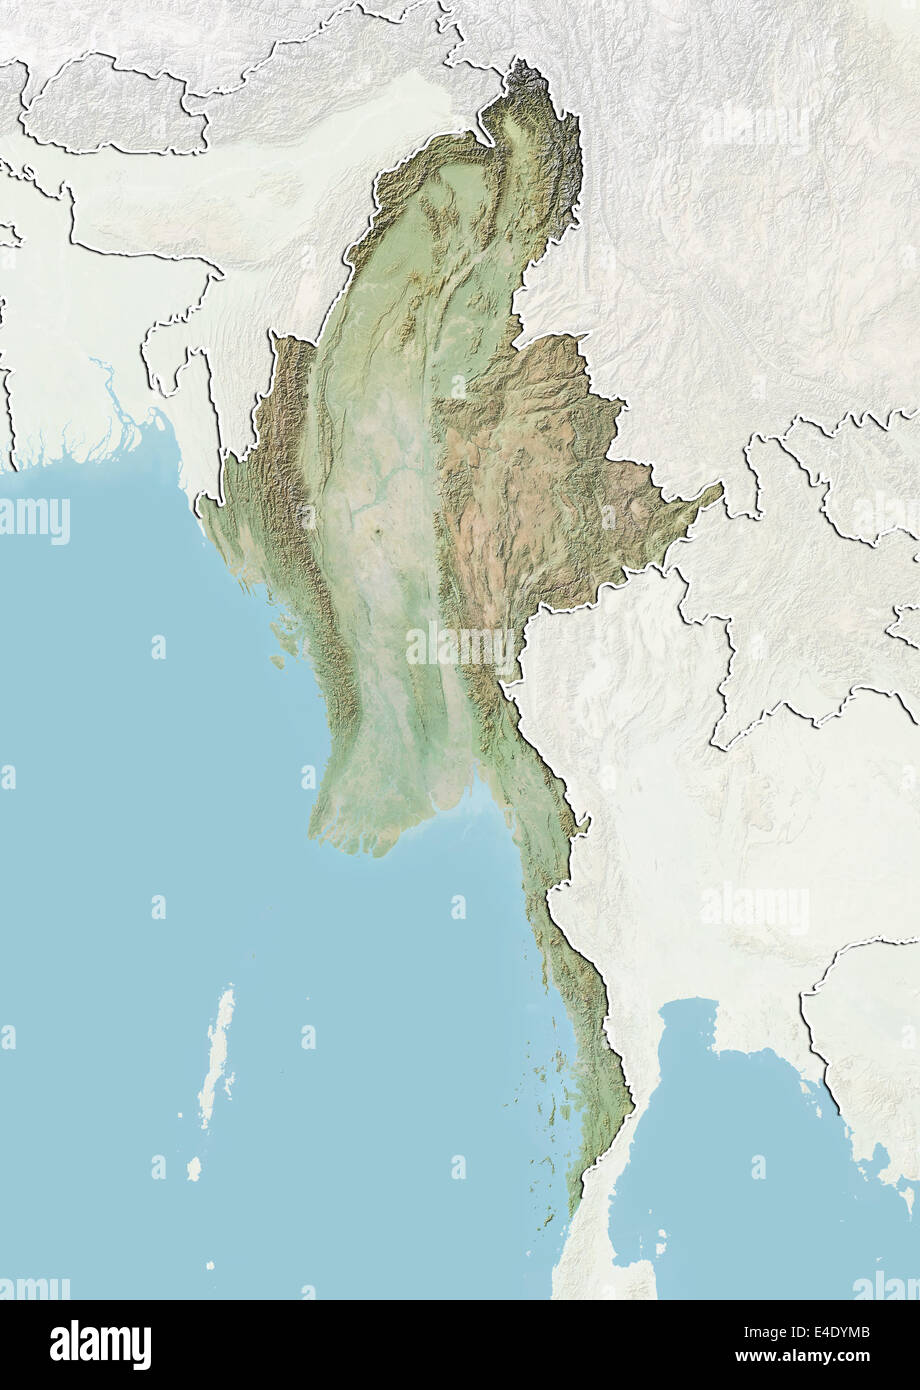 Myanmar, Relief Map With Border and Mask Stock Photo